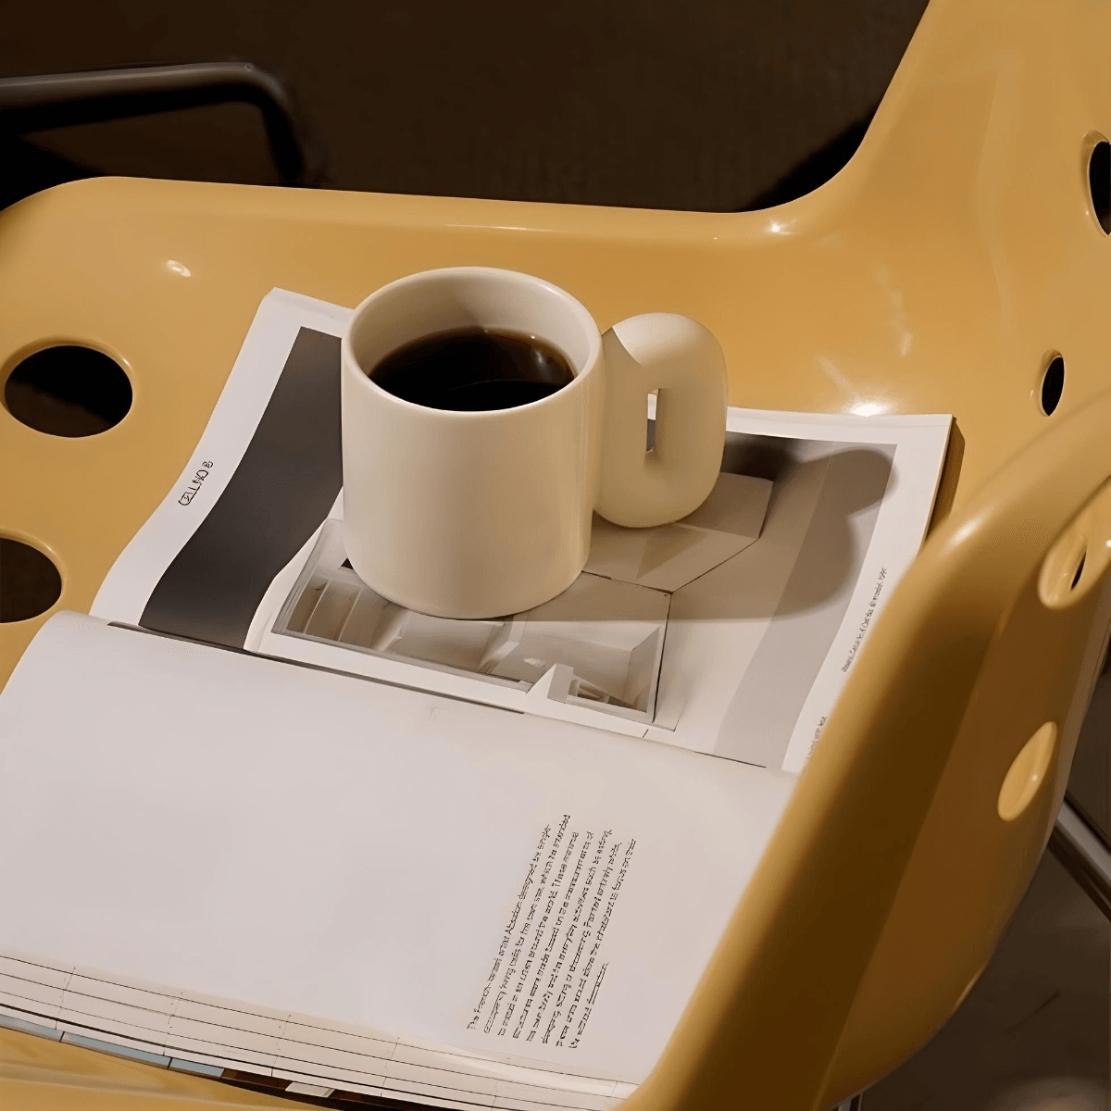 White, ceramic oval handle mug on a magazine and yellow chair